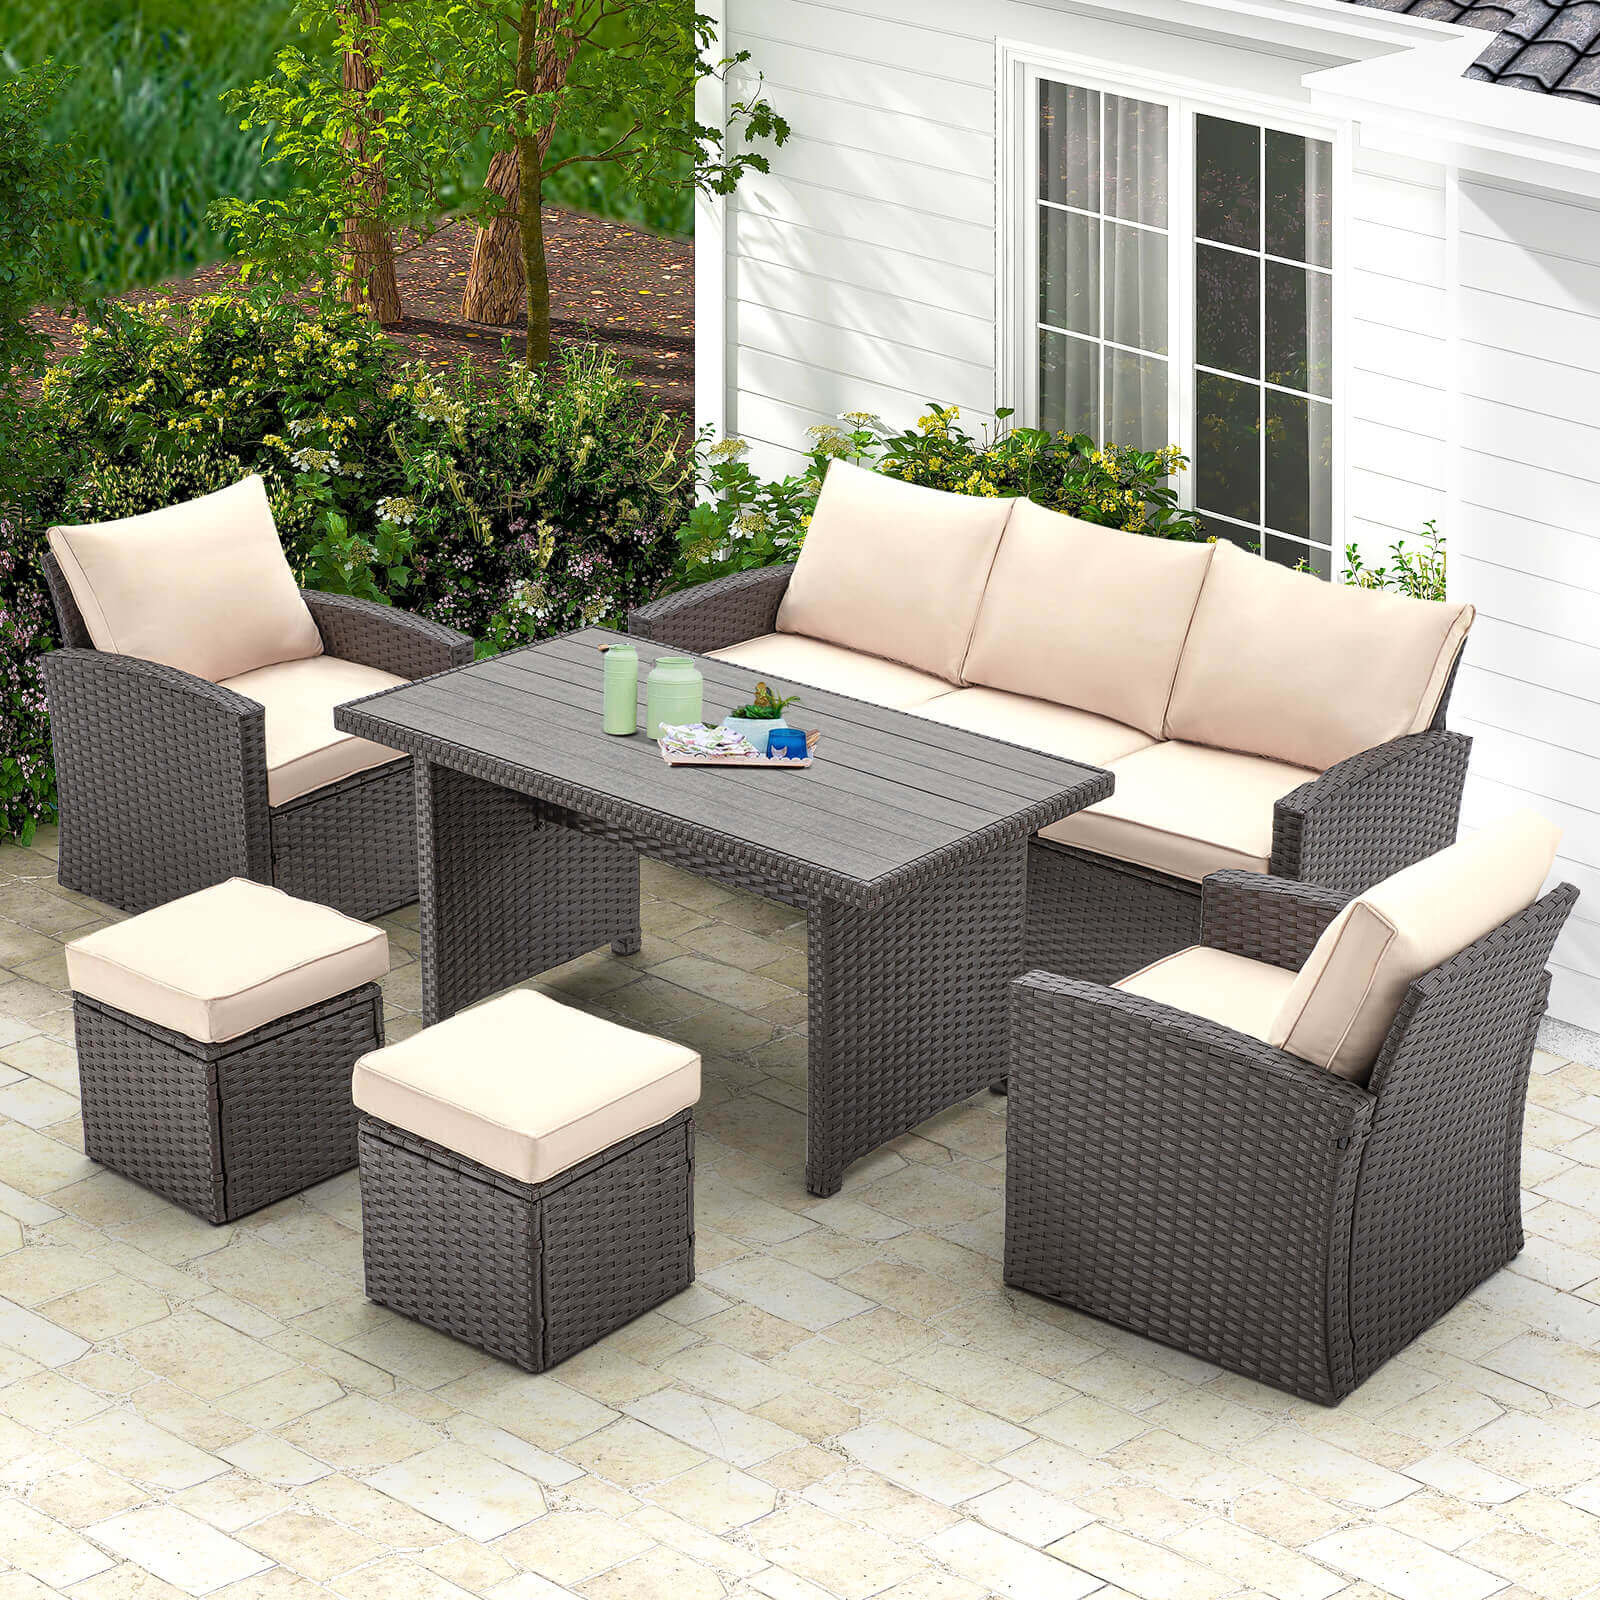 vicluke 7 - person outdoor seating group with cushions & reviews